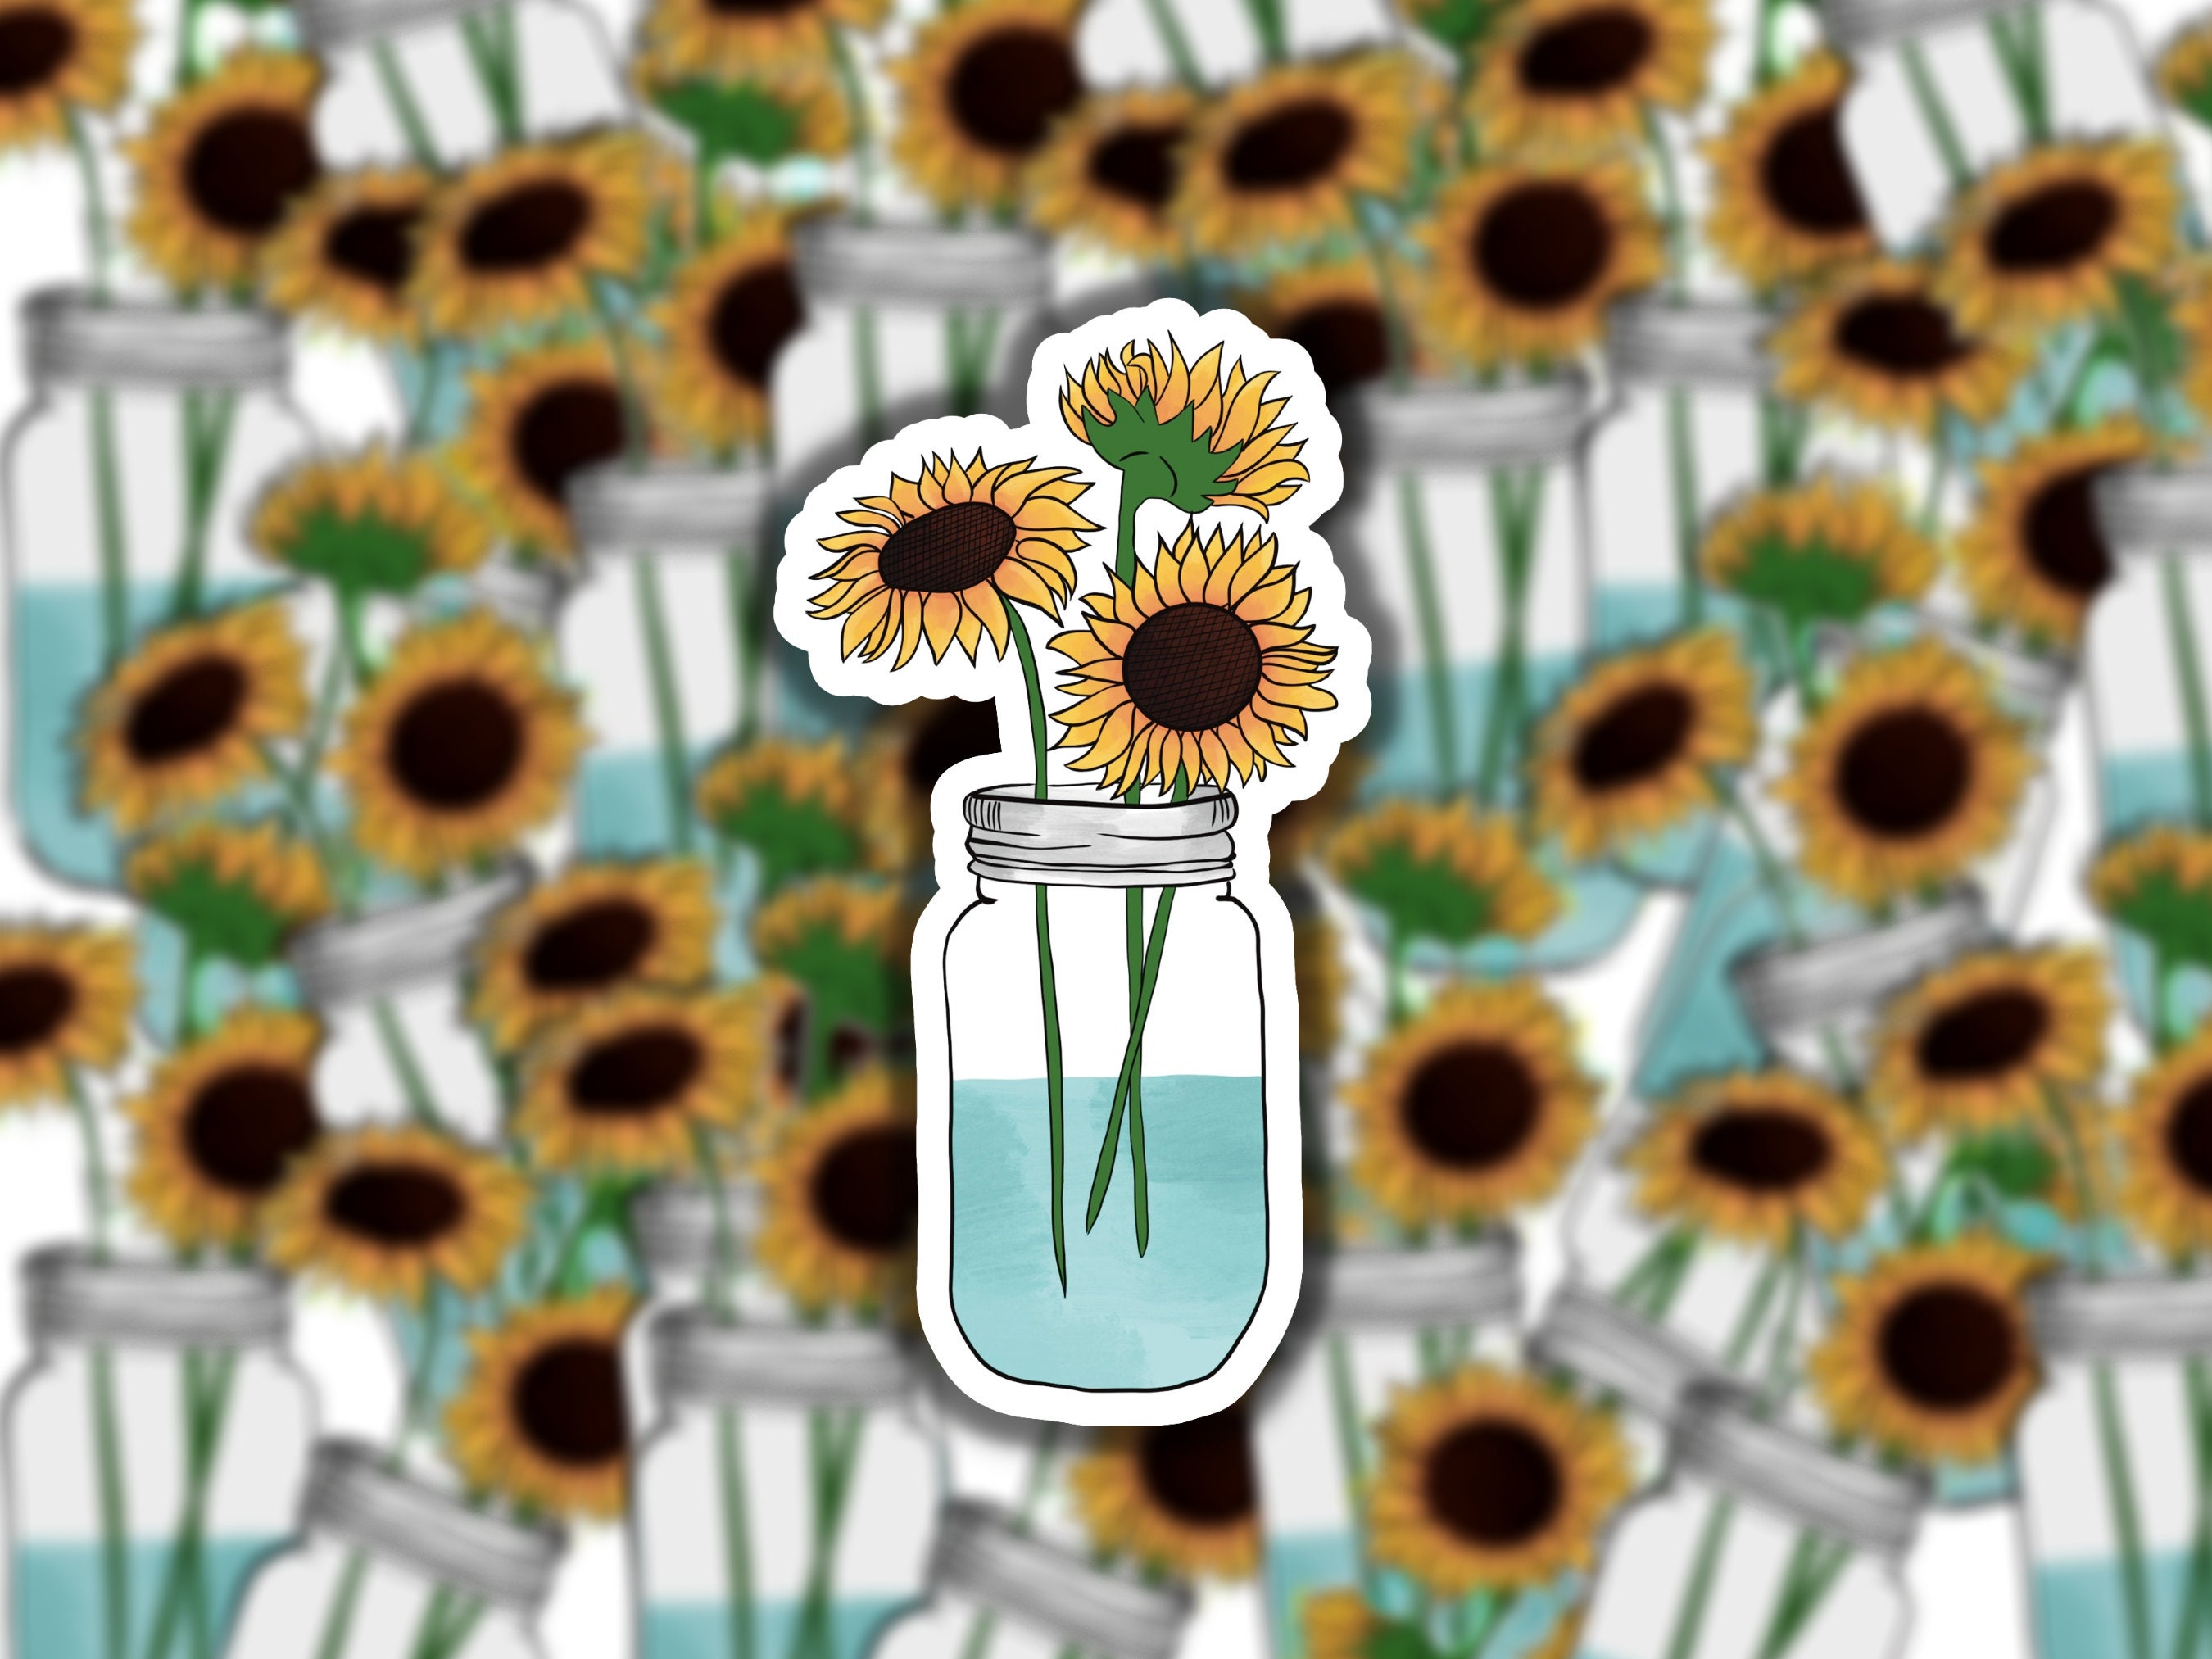 Sunflower Stickers, Set of 6, 15 or 24 Small Sunflower Sparkly Stickers for  Laptops, Scrapbooks, Cards, Journals, Notebooks. Fast Shipping. 